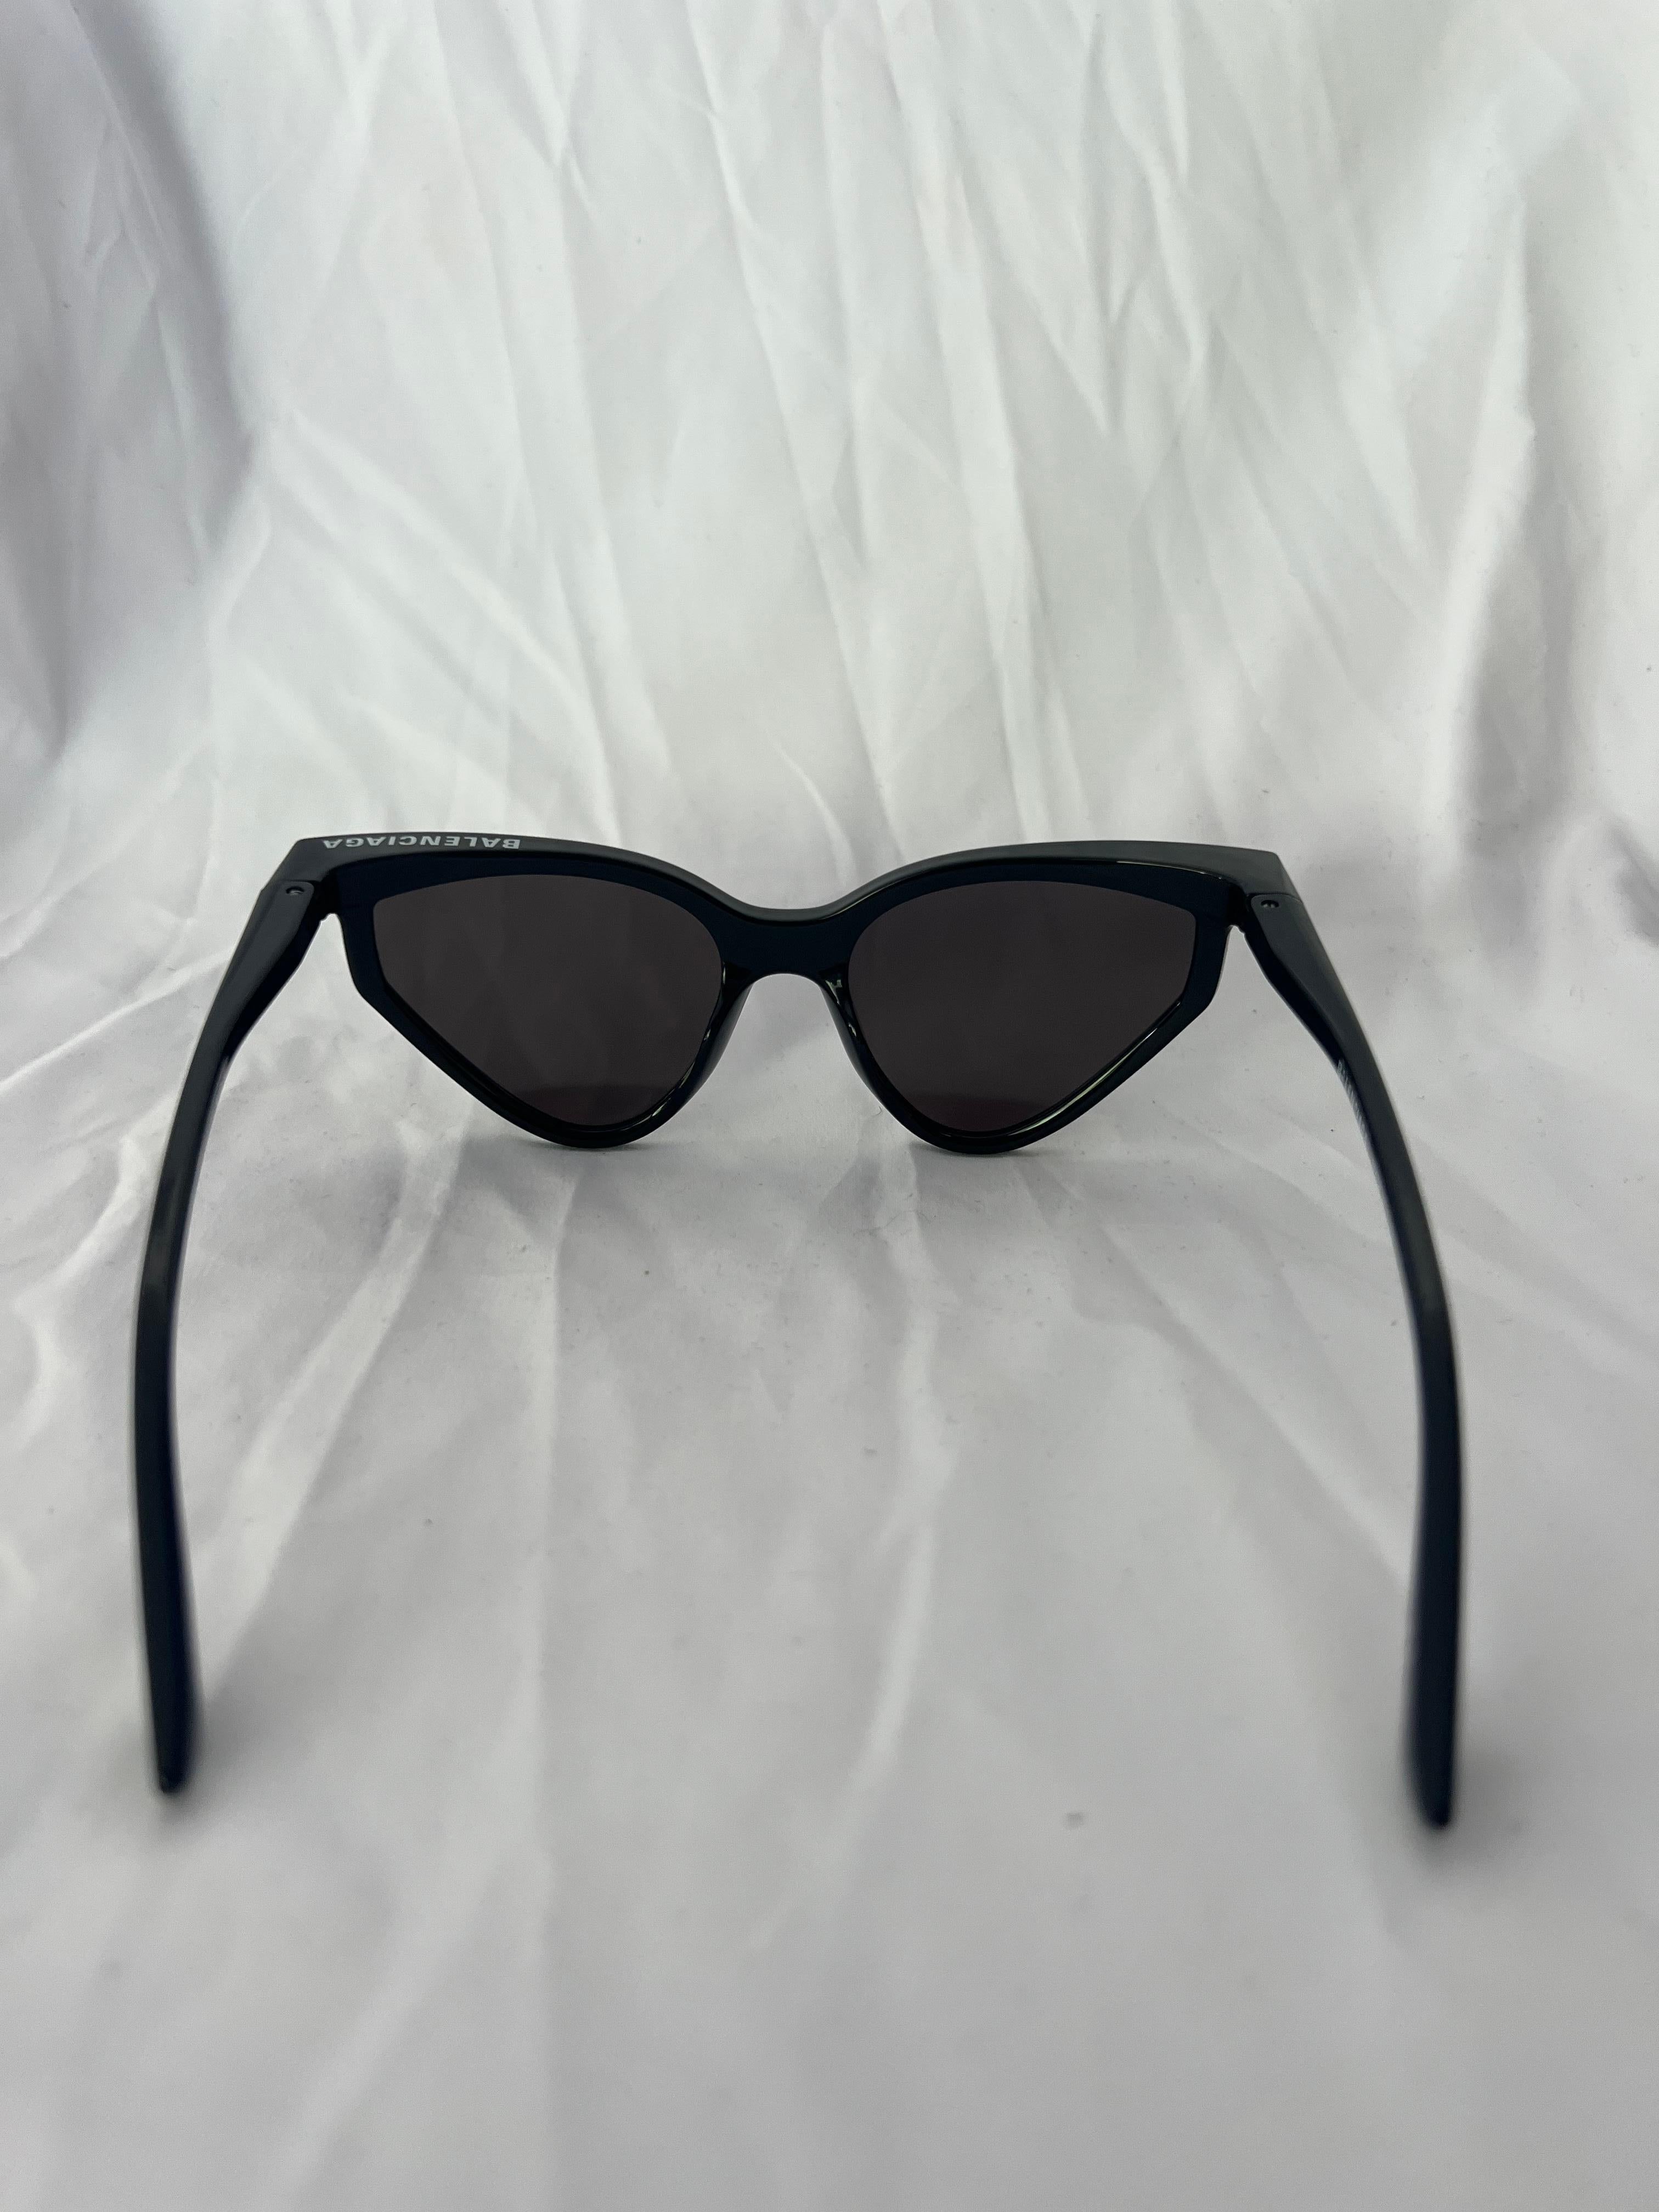 Balenciaga Black Rim Cat Eye Sunglasses In Excellent Condition For Sale In Beverly Hills, CA